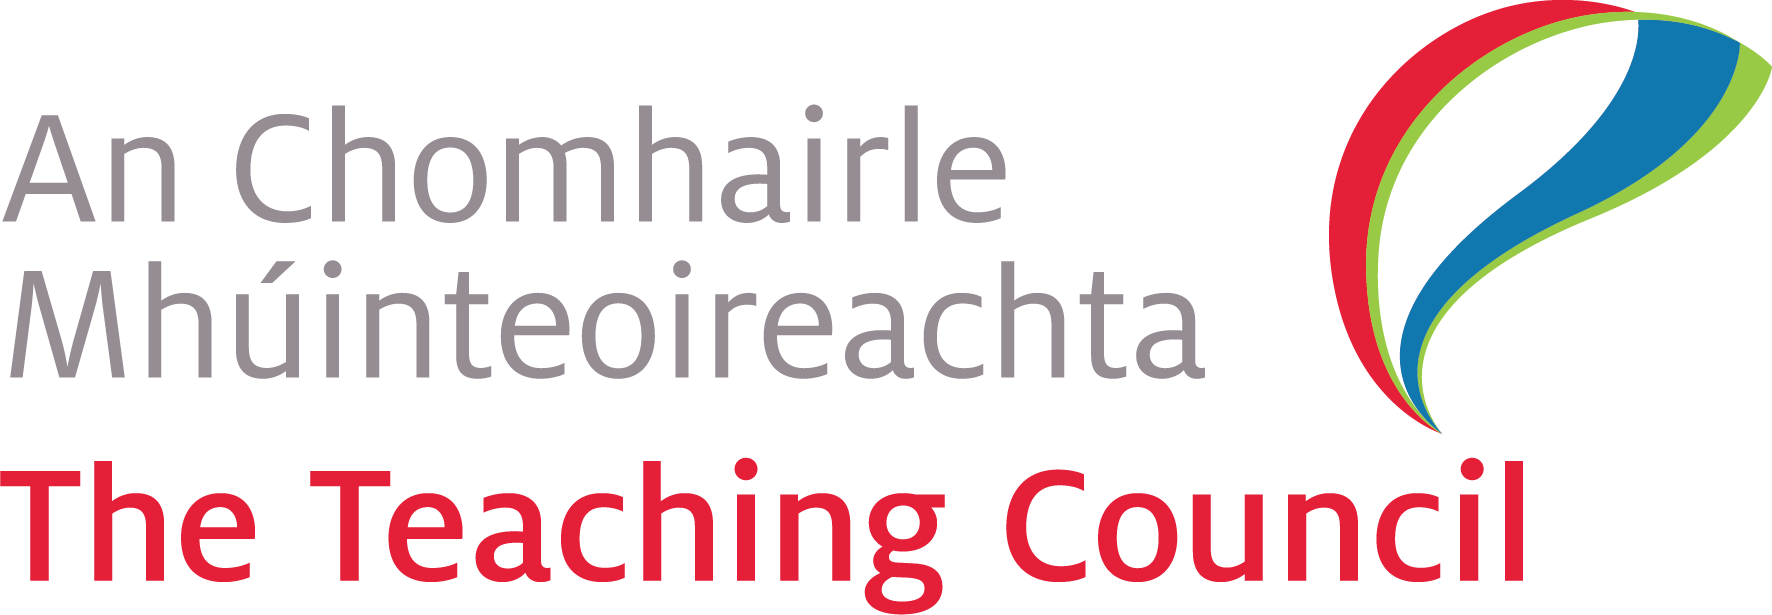 The Teaching Council of Ireland